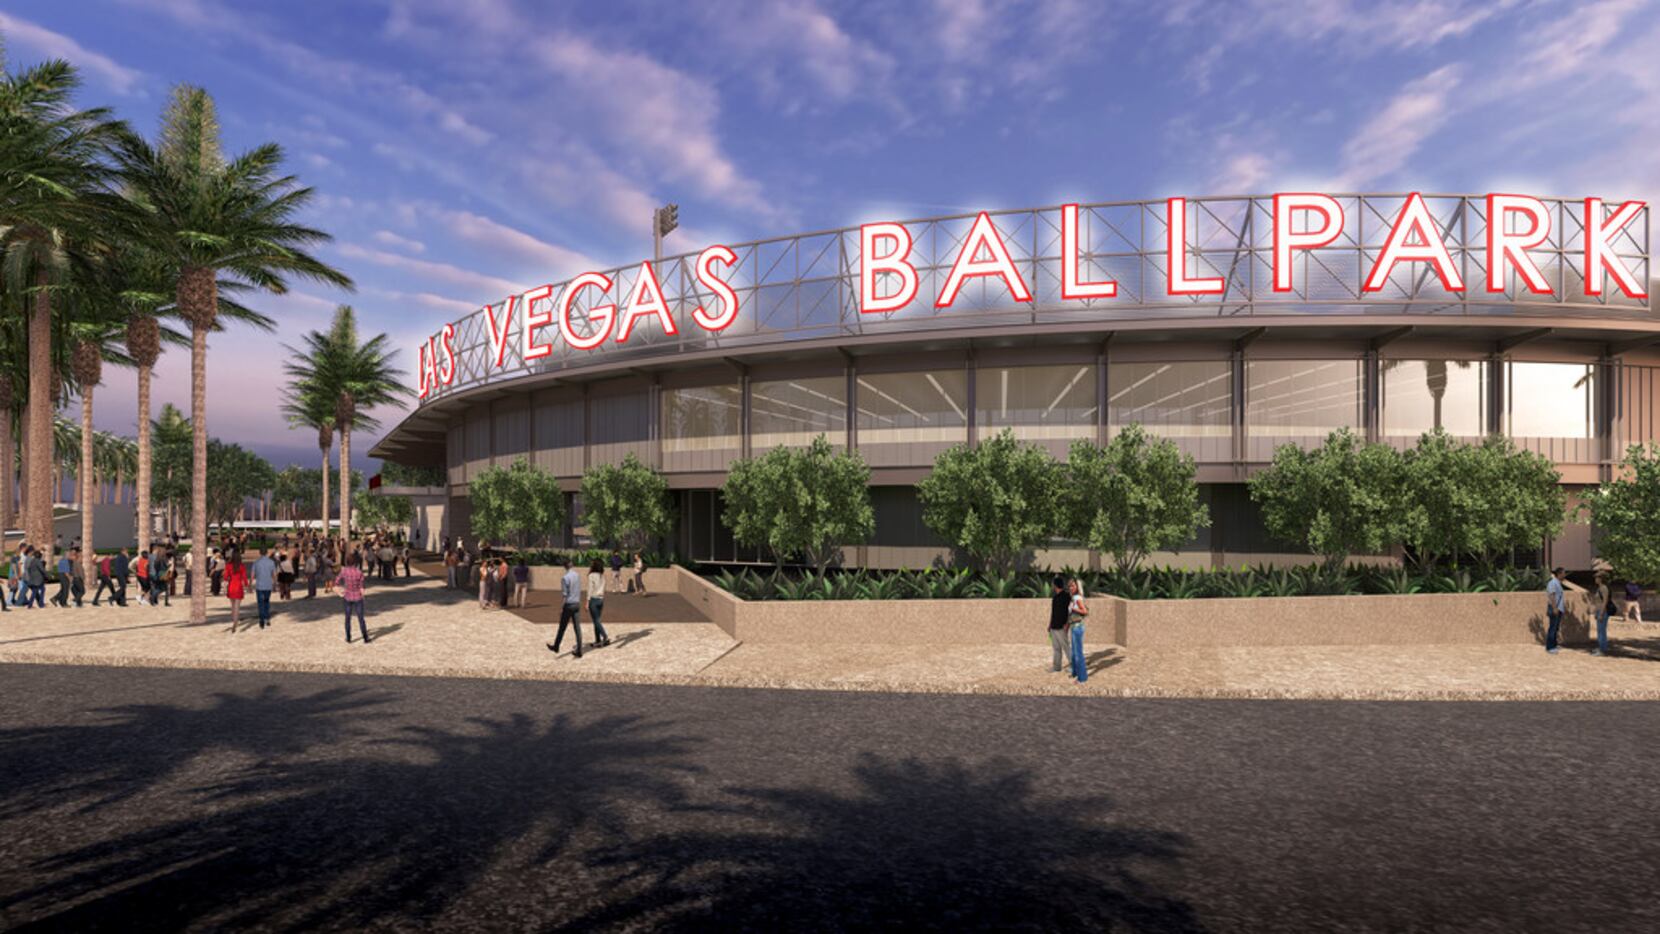 The stadium will be called Las Vegas Ballpark under a 20-year naming rights deal with the...